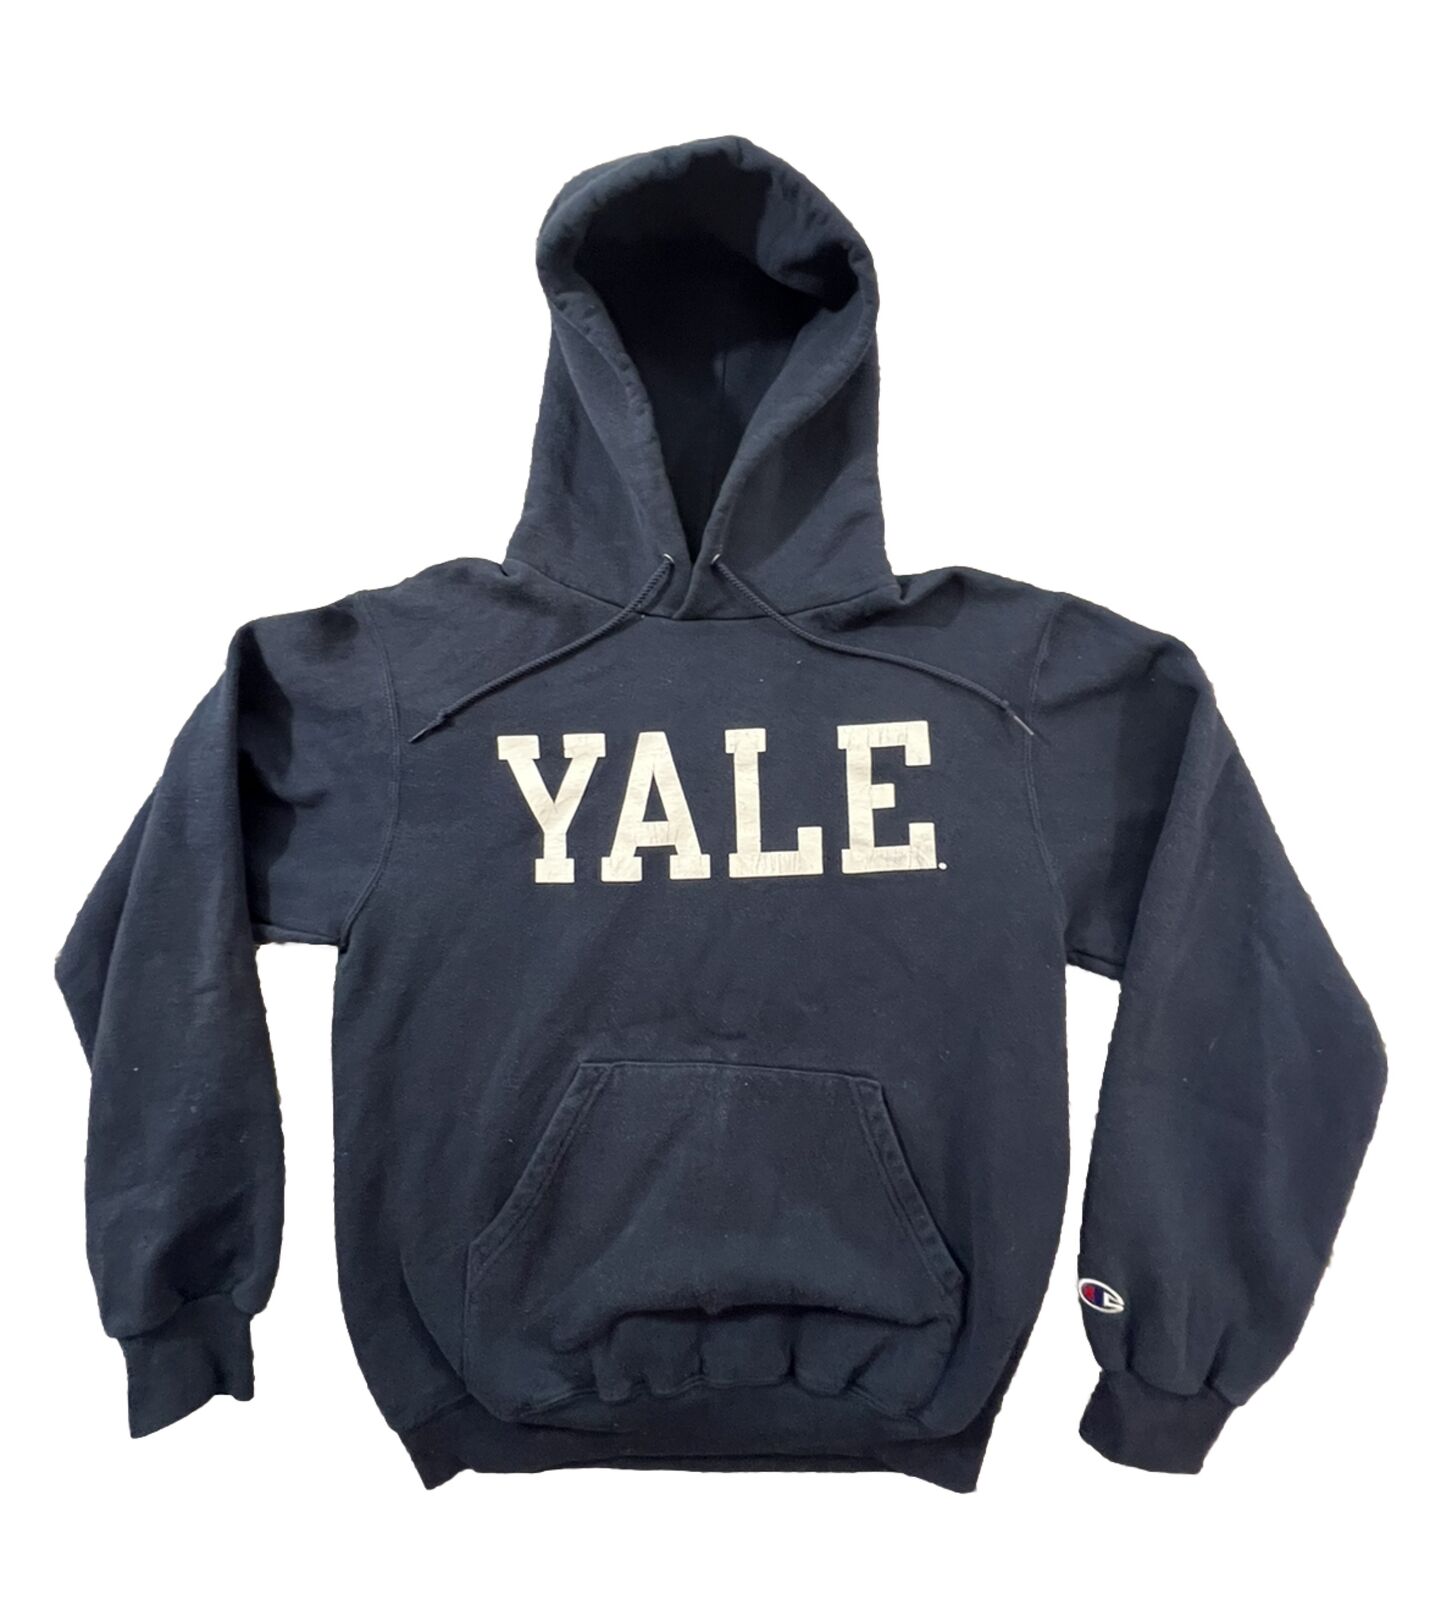 Vintage 90s Champion Yale University Men’s Small Hoodie Sweatshirt Spell Out